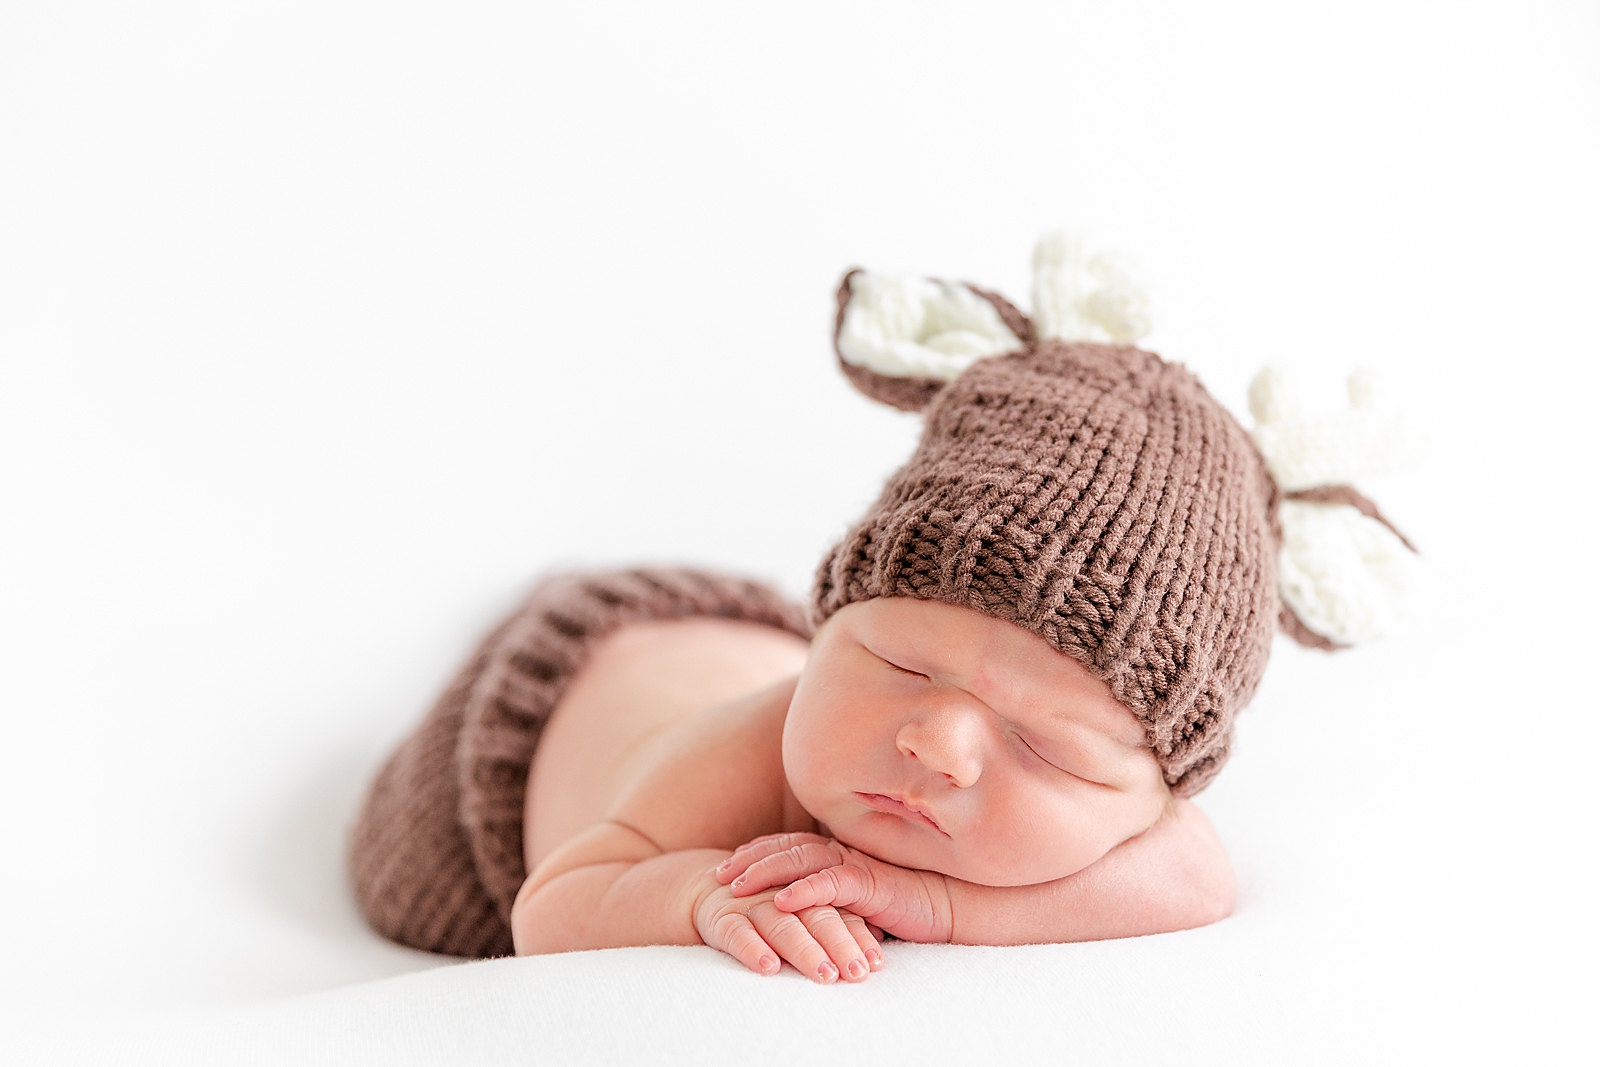 Newborn dressed in deer outfit asleep on his tummy in a posed photo on a white background